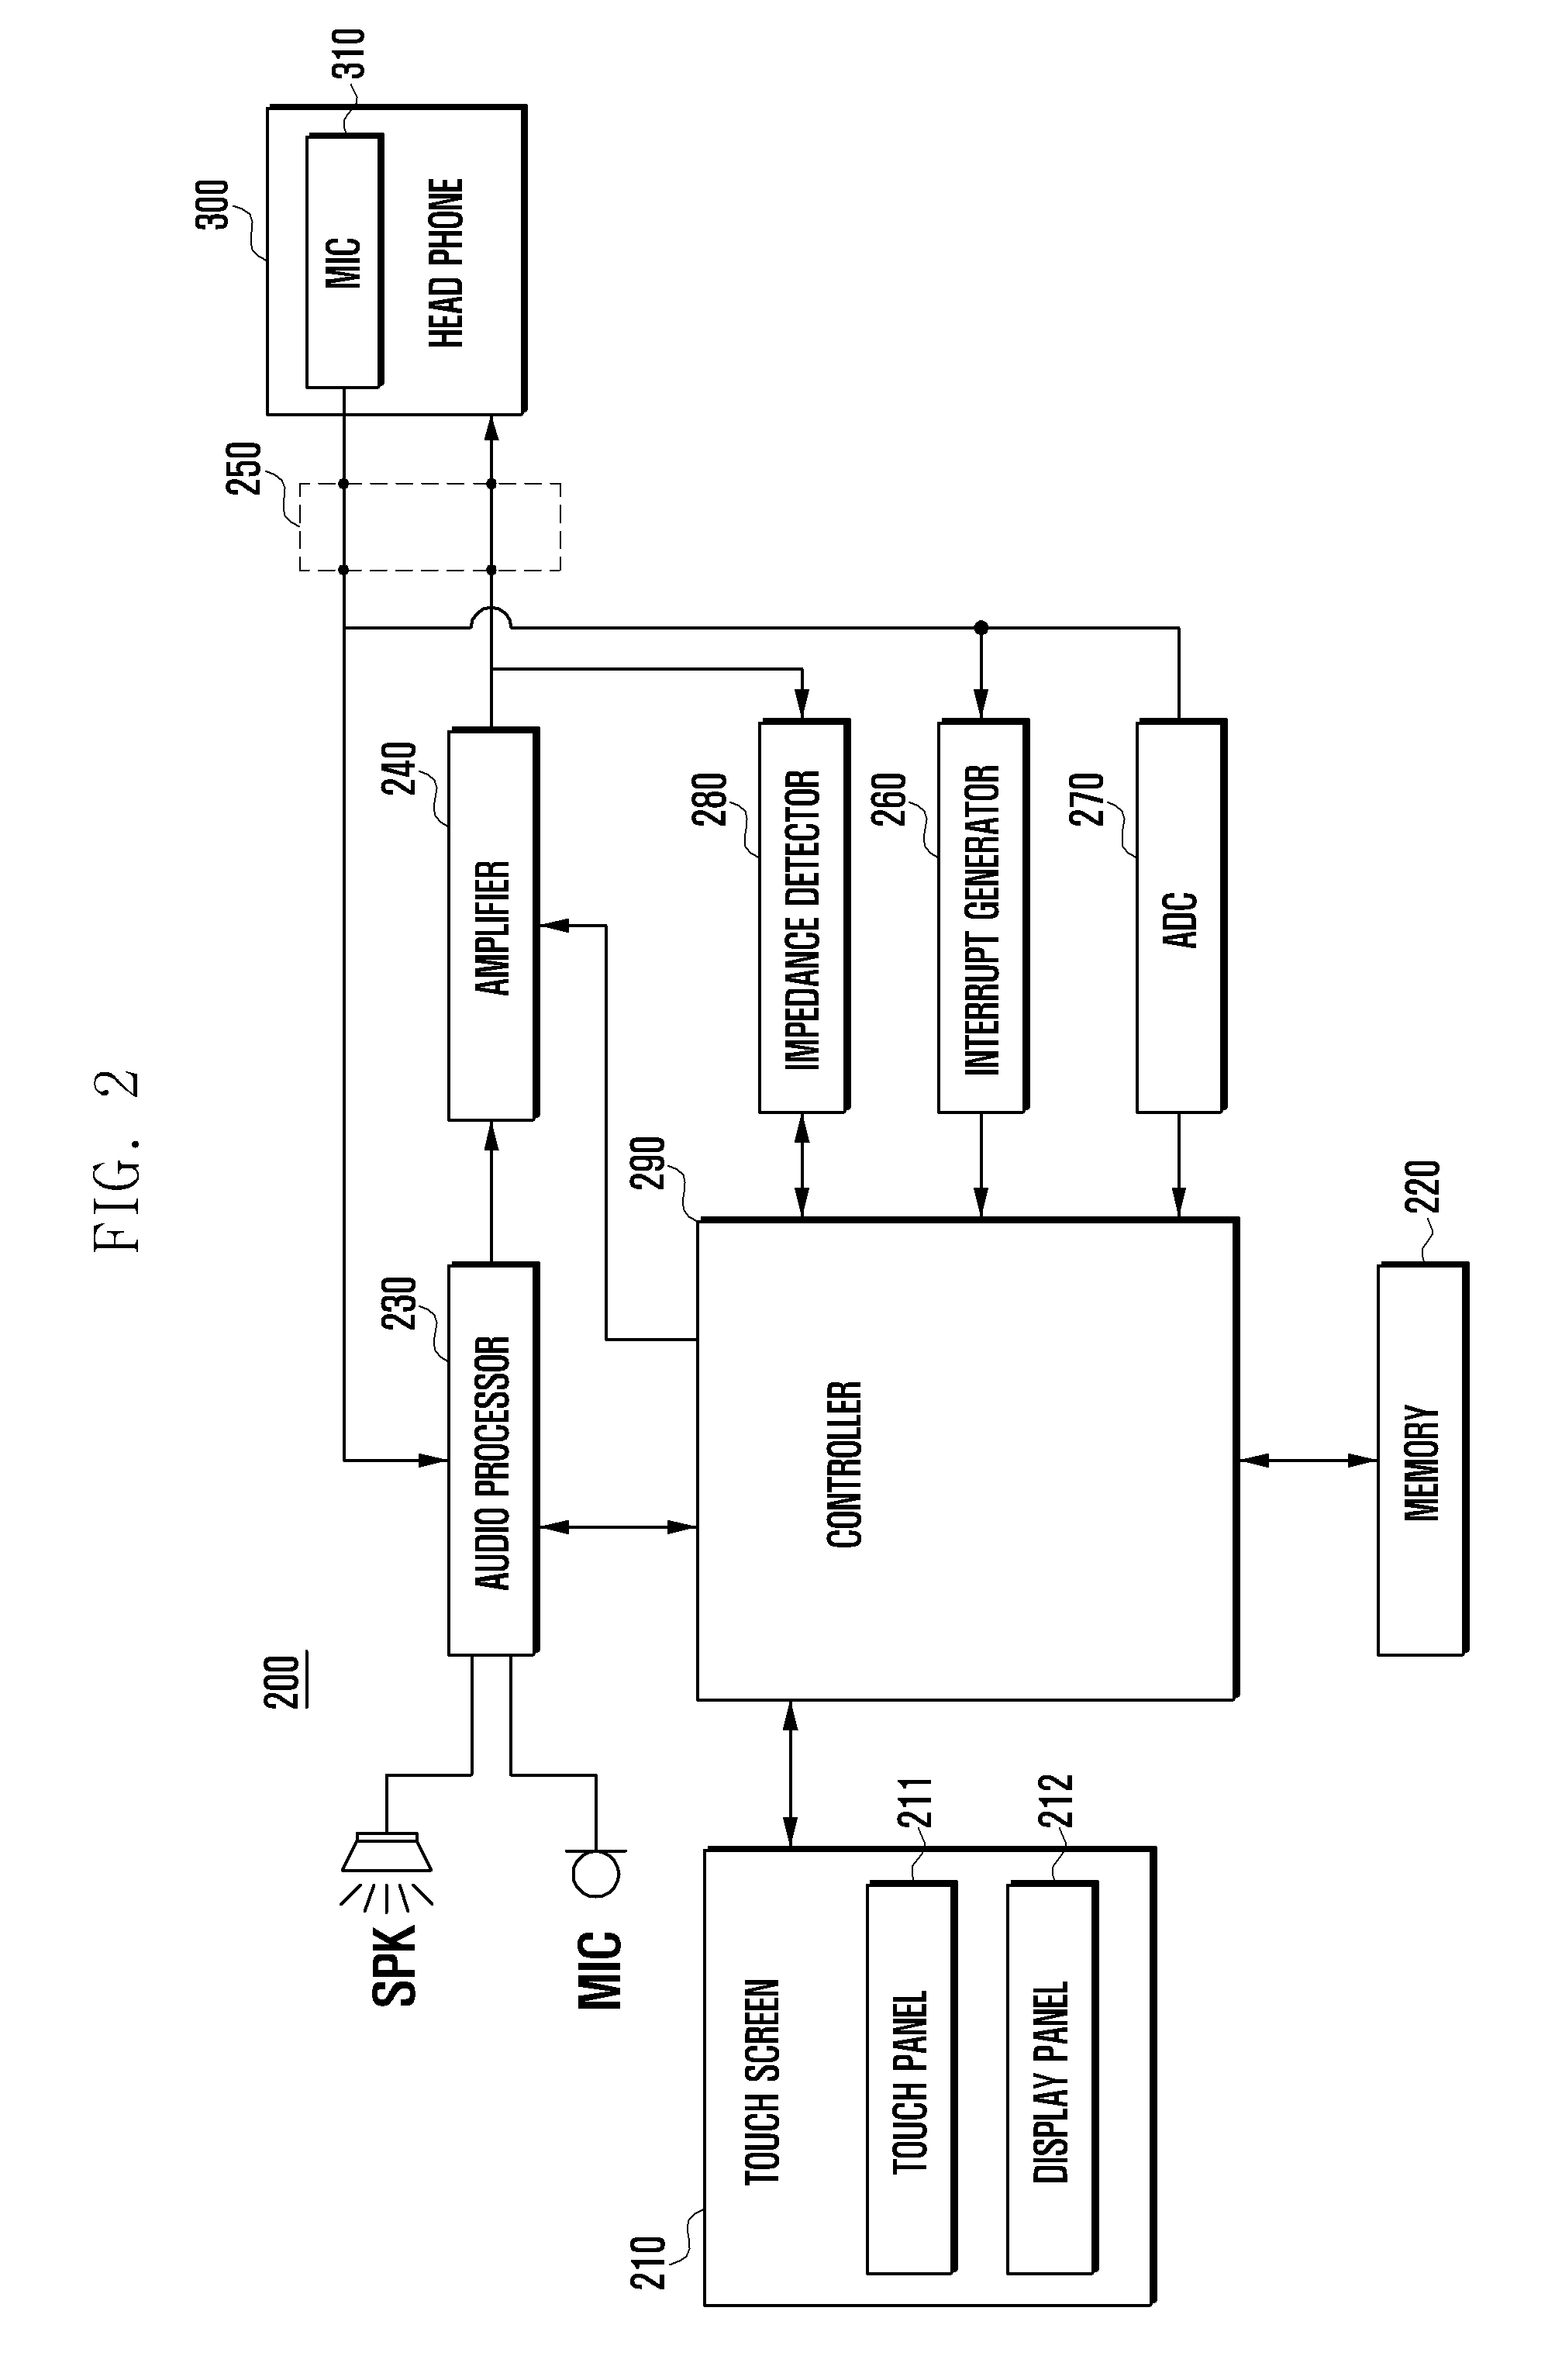 Method and apparatus for controlling audio output